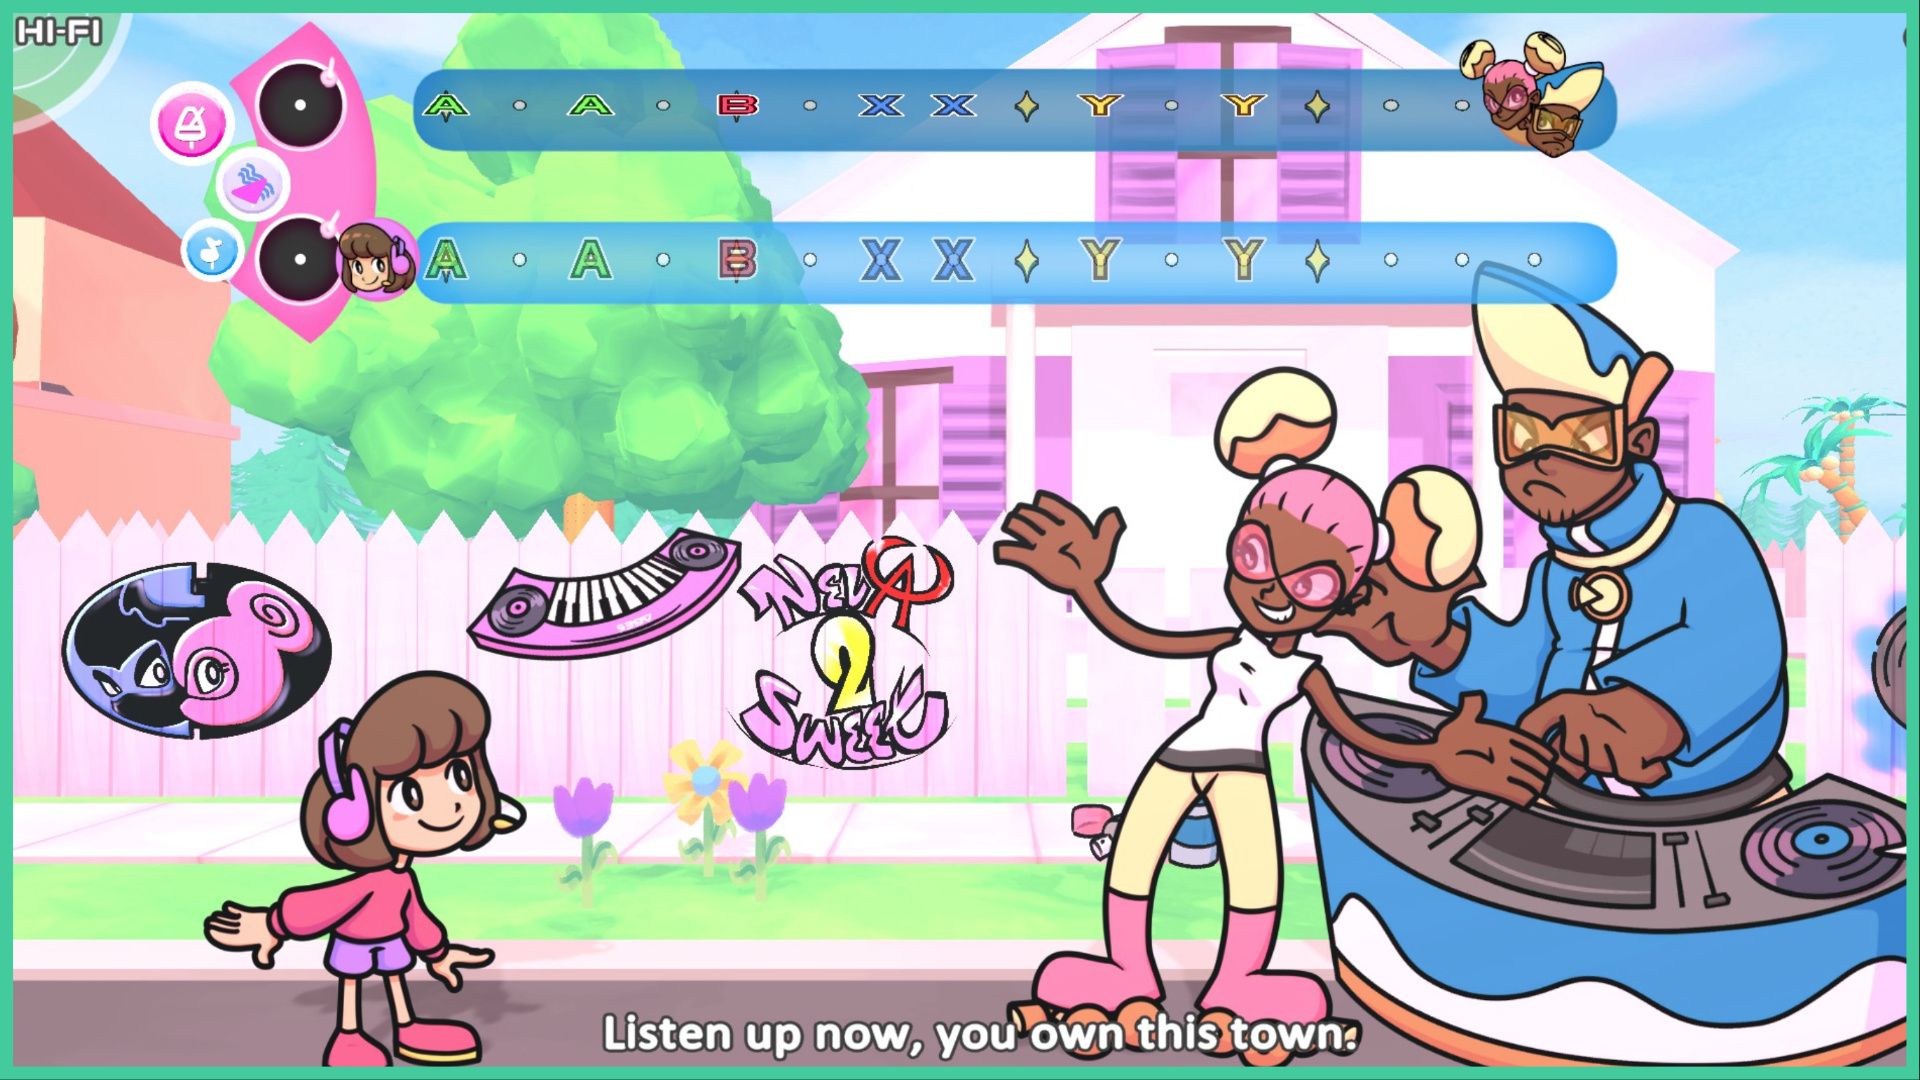 feature image for our scratchin' melodii news, the image features a screenshot from the demo of the main character standing by a pavement as she faces her opponent who has a DJ deck in front of him, as a female character smirks, there is a pink house behind them, as well as a pink fence and flowers in the grass, there are drawings of a pink keyboard, and some graffiti on the fence, as the two bars at the top indicate the order of buttons that need to be pressed for the rhythm, there is text at the bottom that reads "listen up now, you own this town"